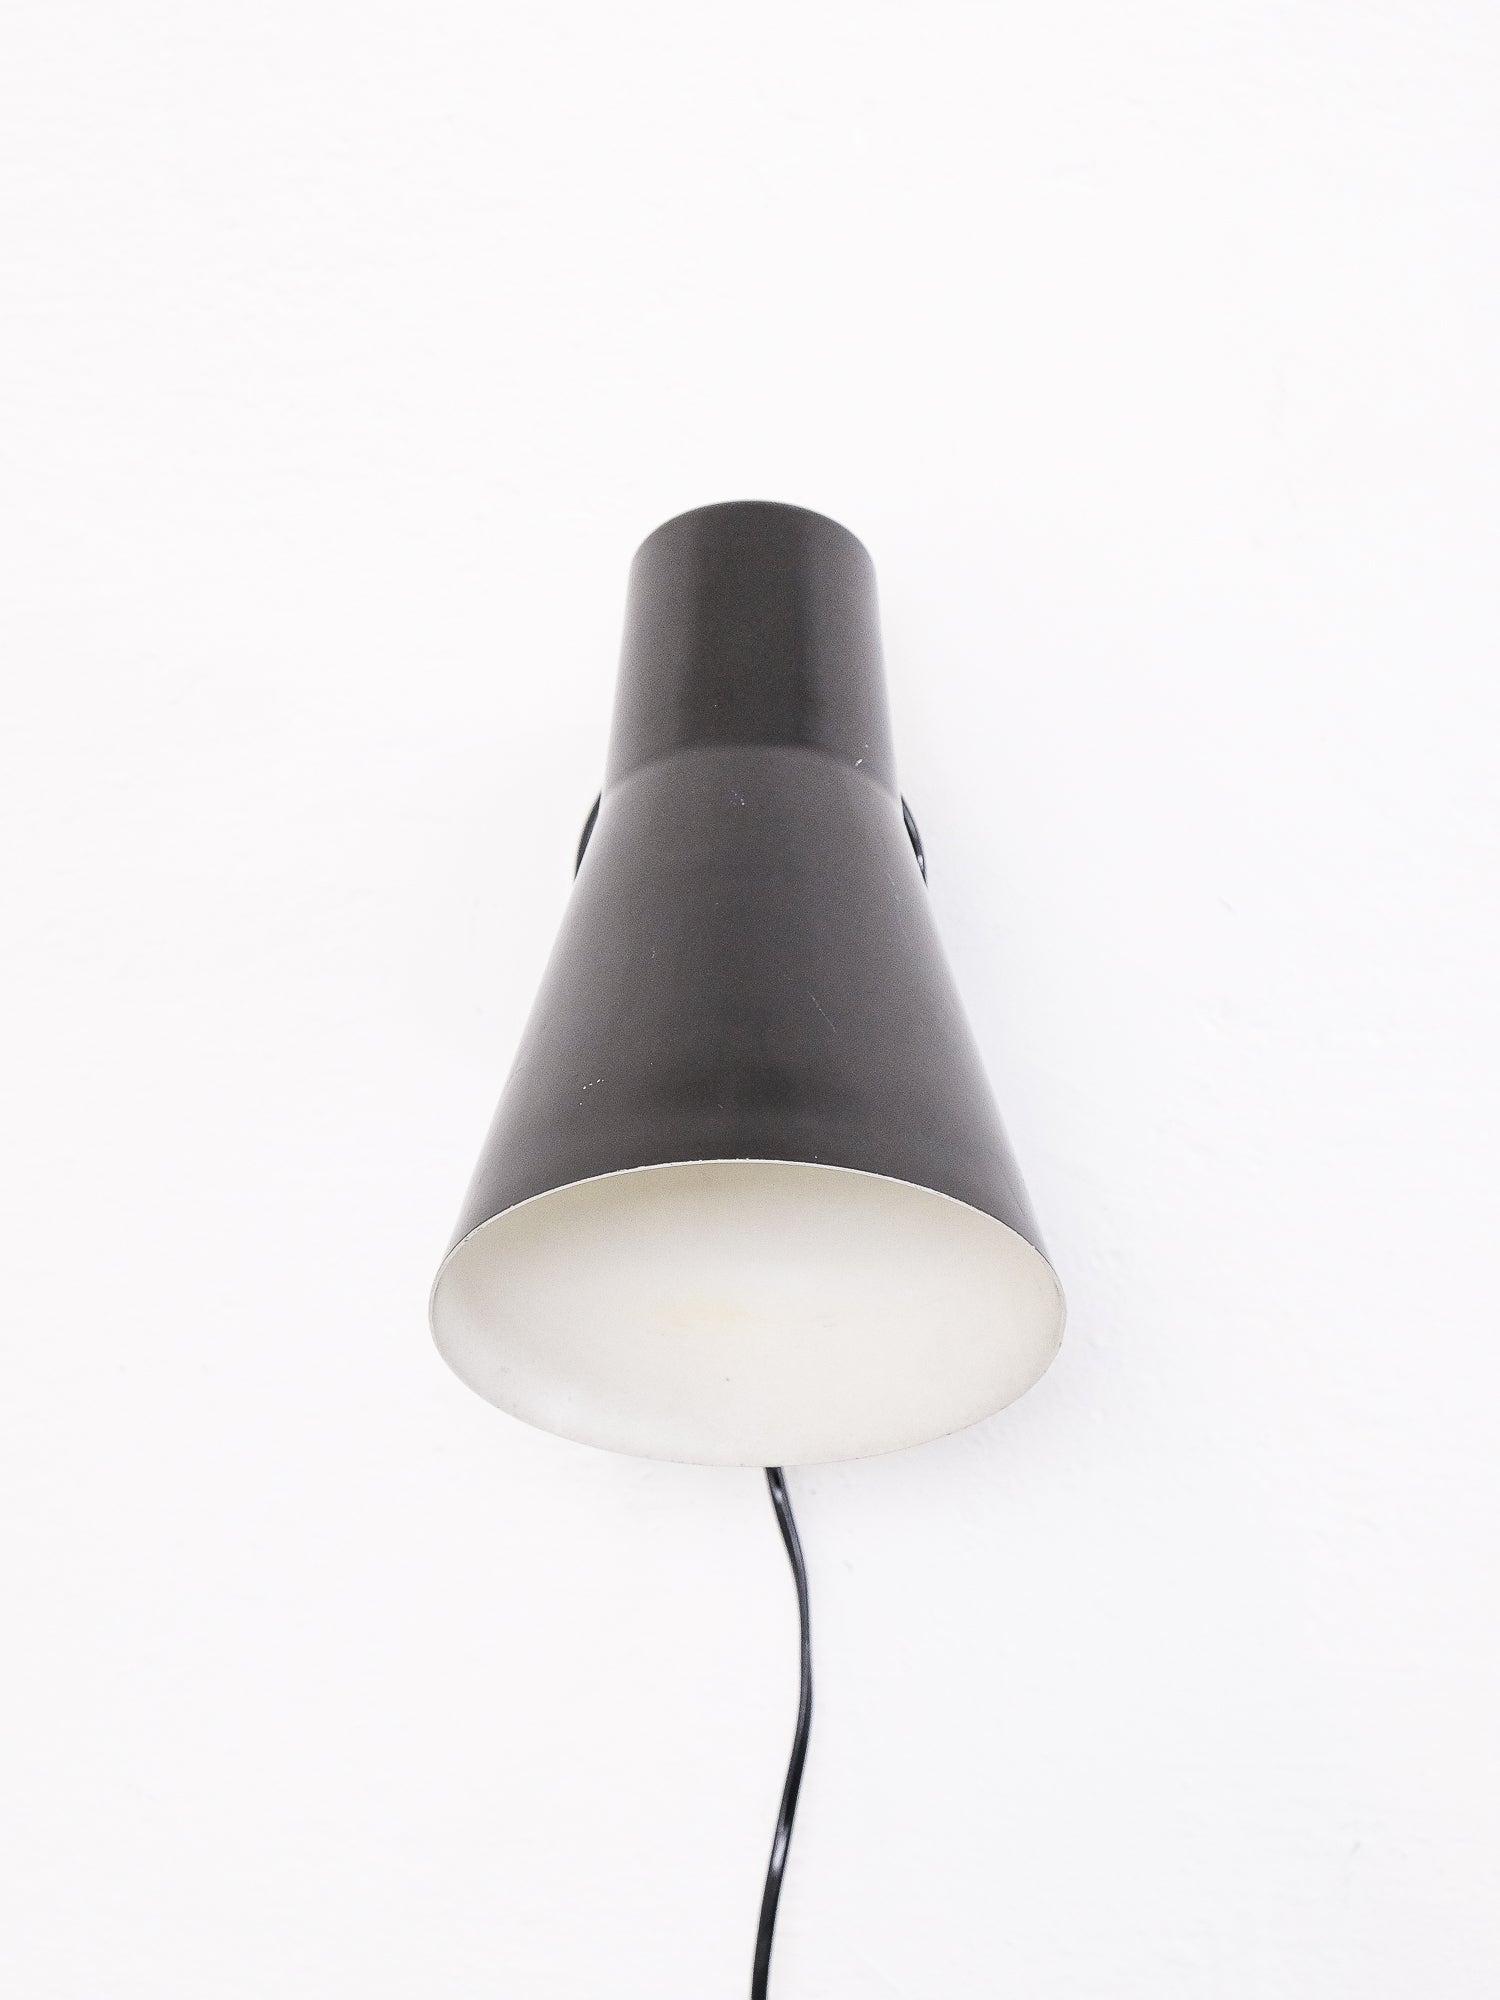 Wall Light Model 13-003 by Lisa Johansson-Pape for Stockmann Orno, 1960s